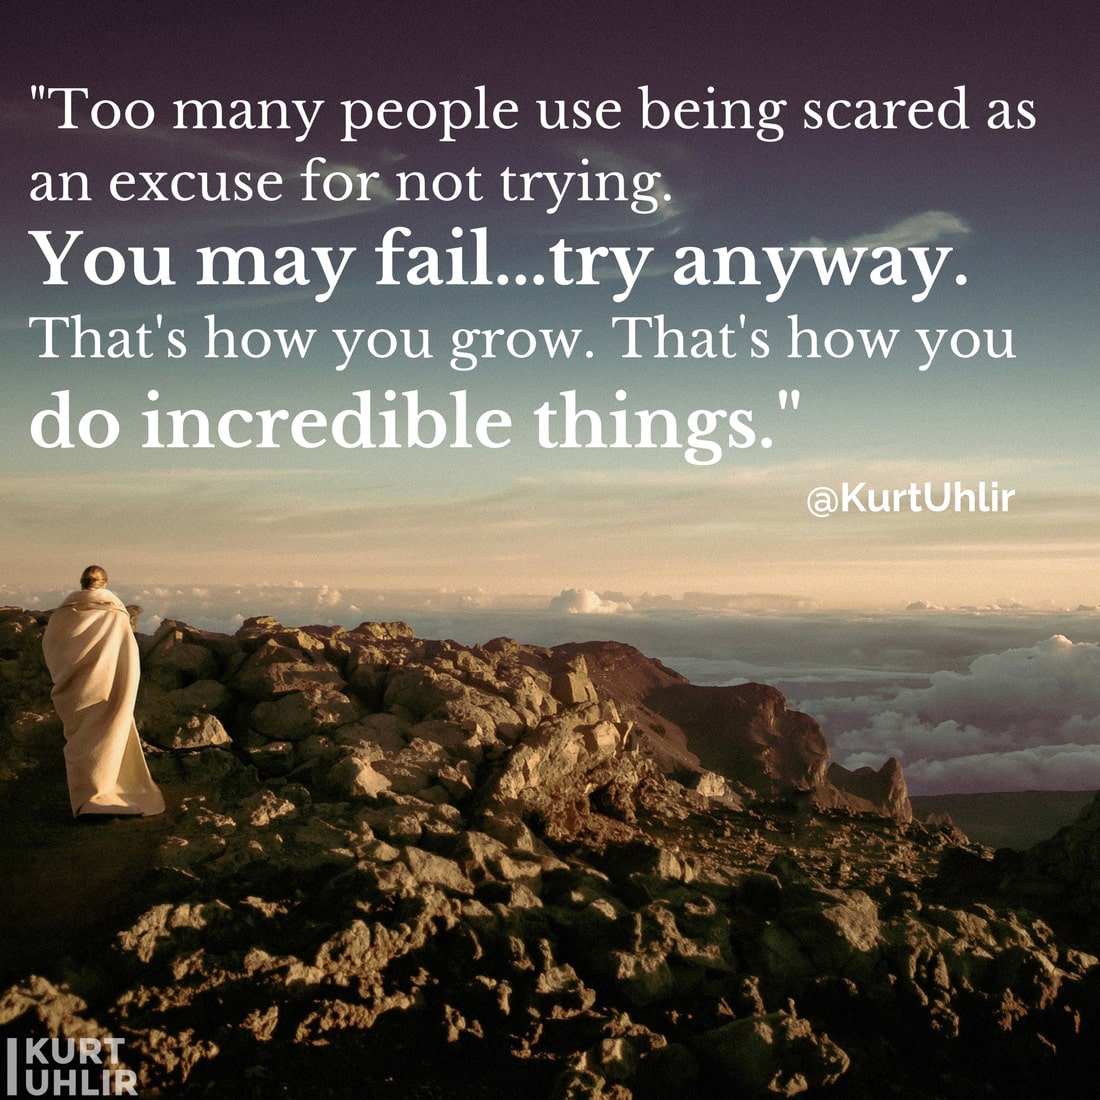 Too many people use being scared as an excuse for not trying. You may fail...try anyway. That's how you grow. That's how you do incredible things! - Kurt Uhlir quote - Leadership | Motivation | Entrepreneurship